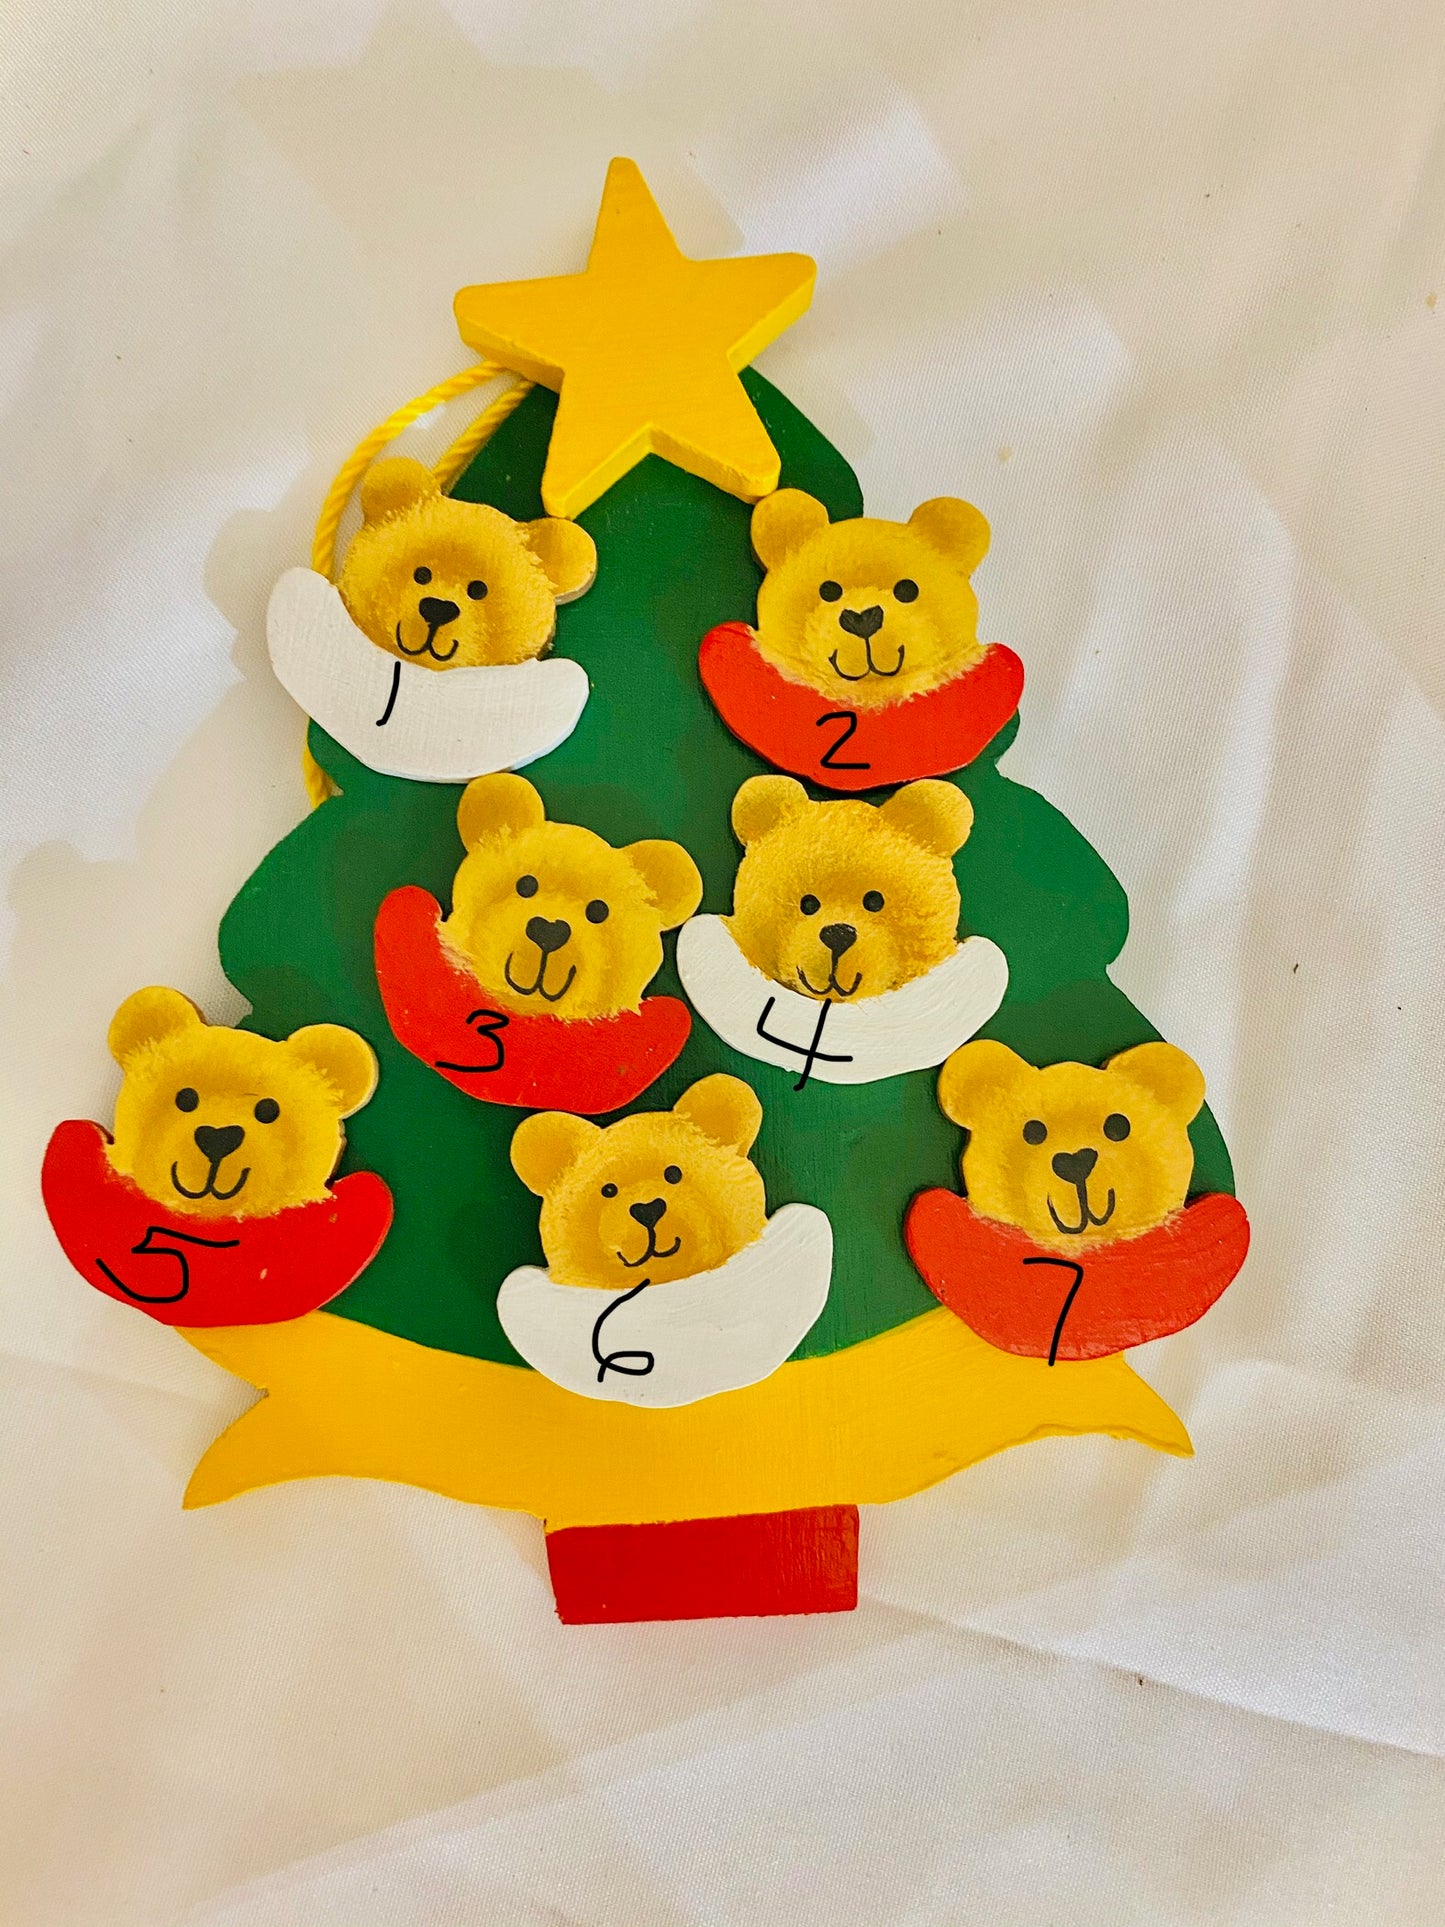 Personalized Ornament  7 Bear Faces on a Christmas Tree 6" x 4.5"